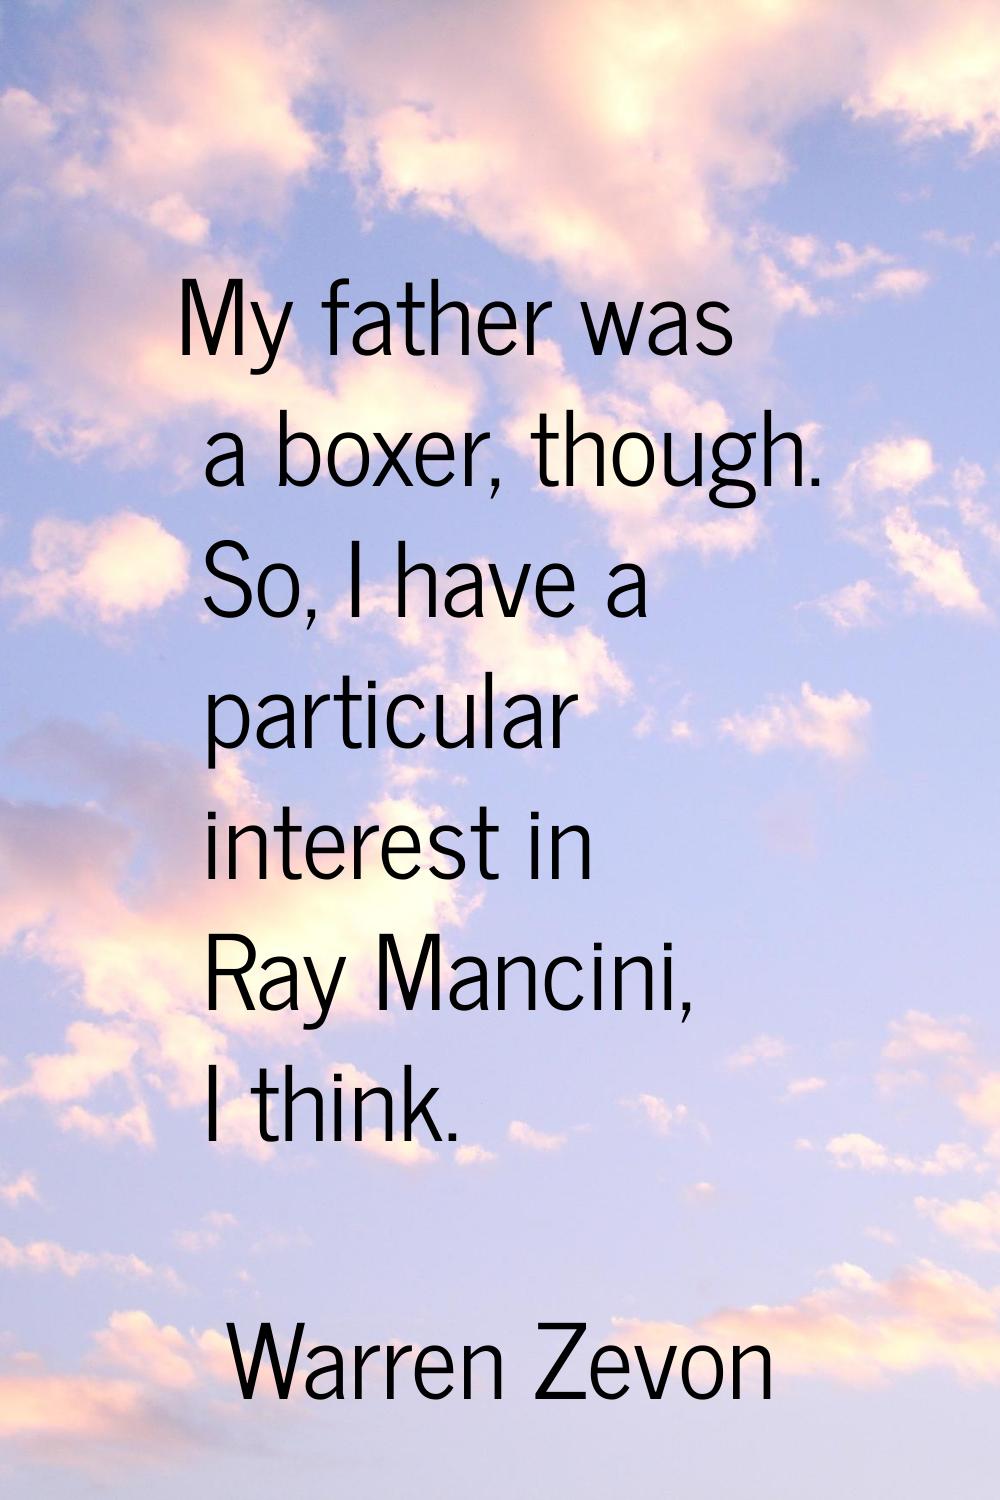 My father was a boxer, though. So, I have a particular interest in Ray Mancini, I think.